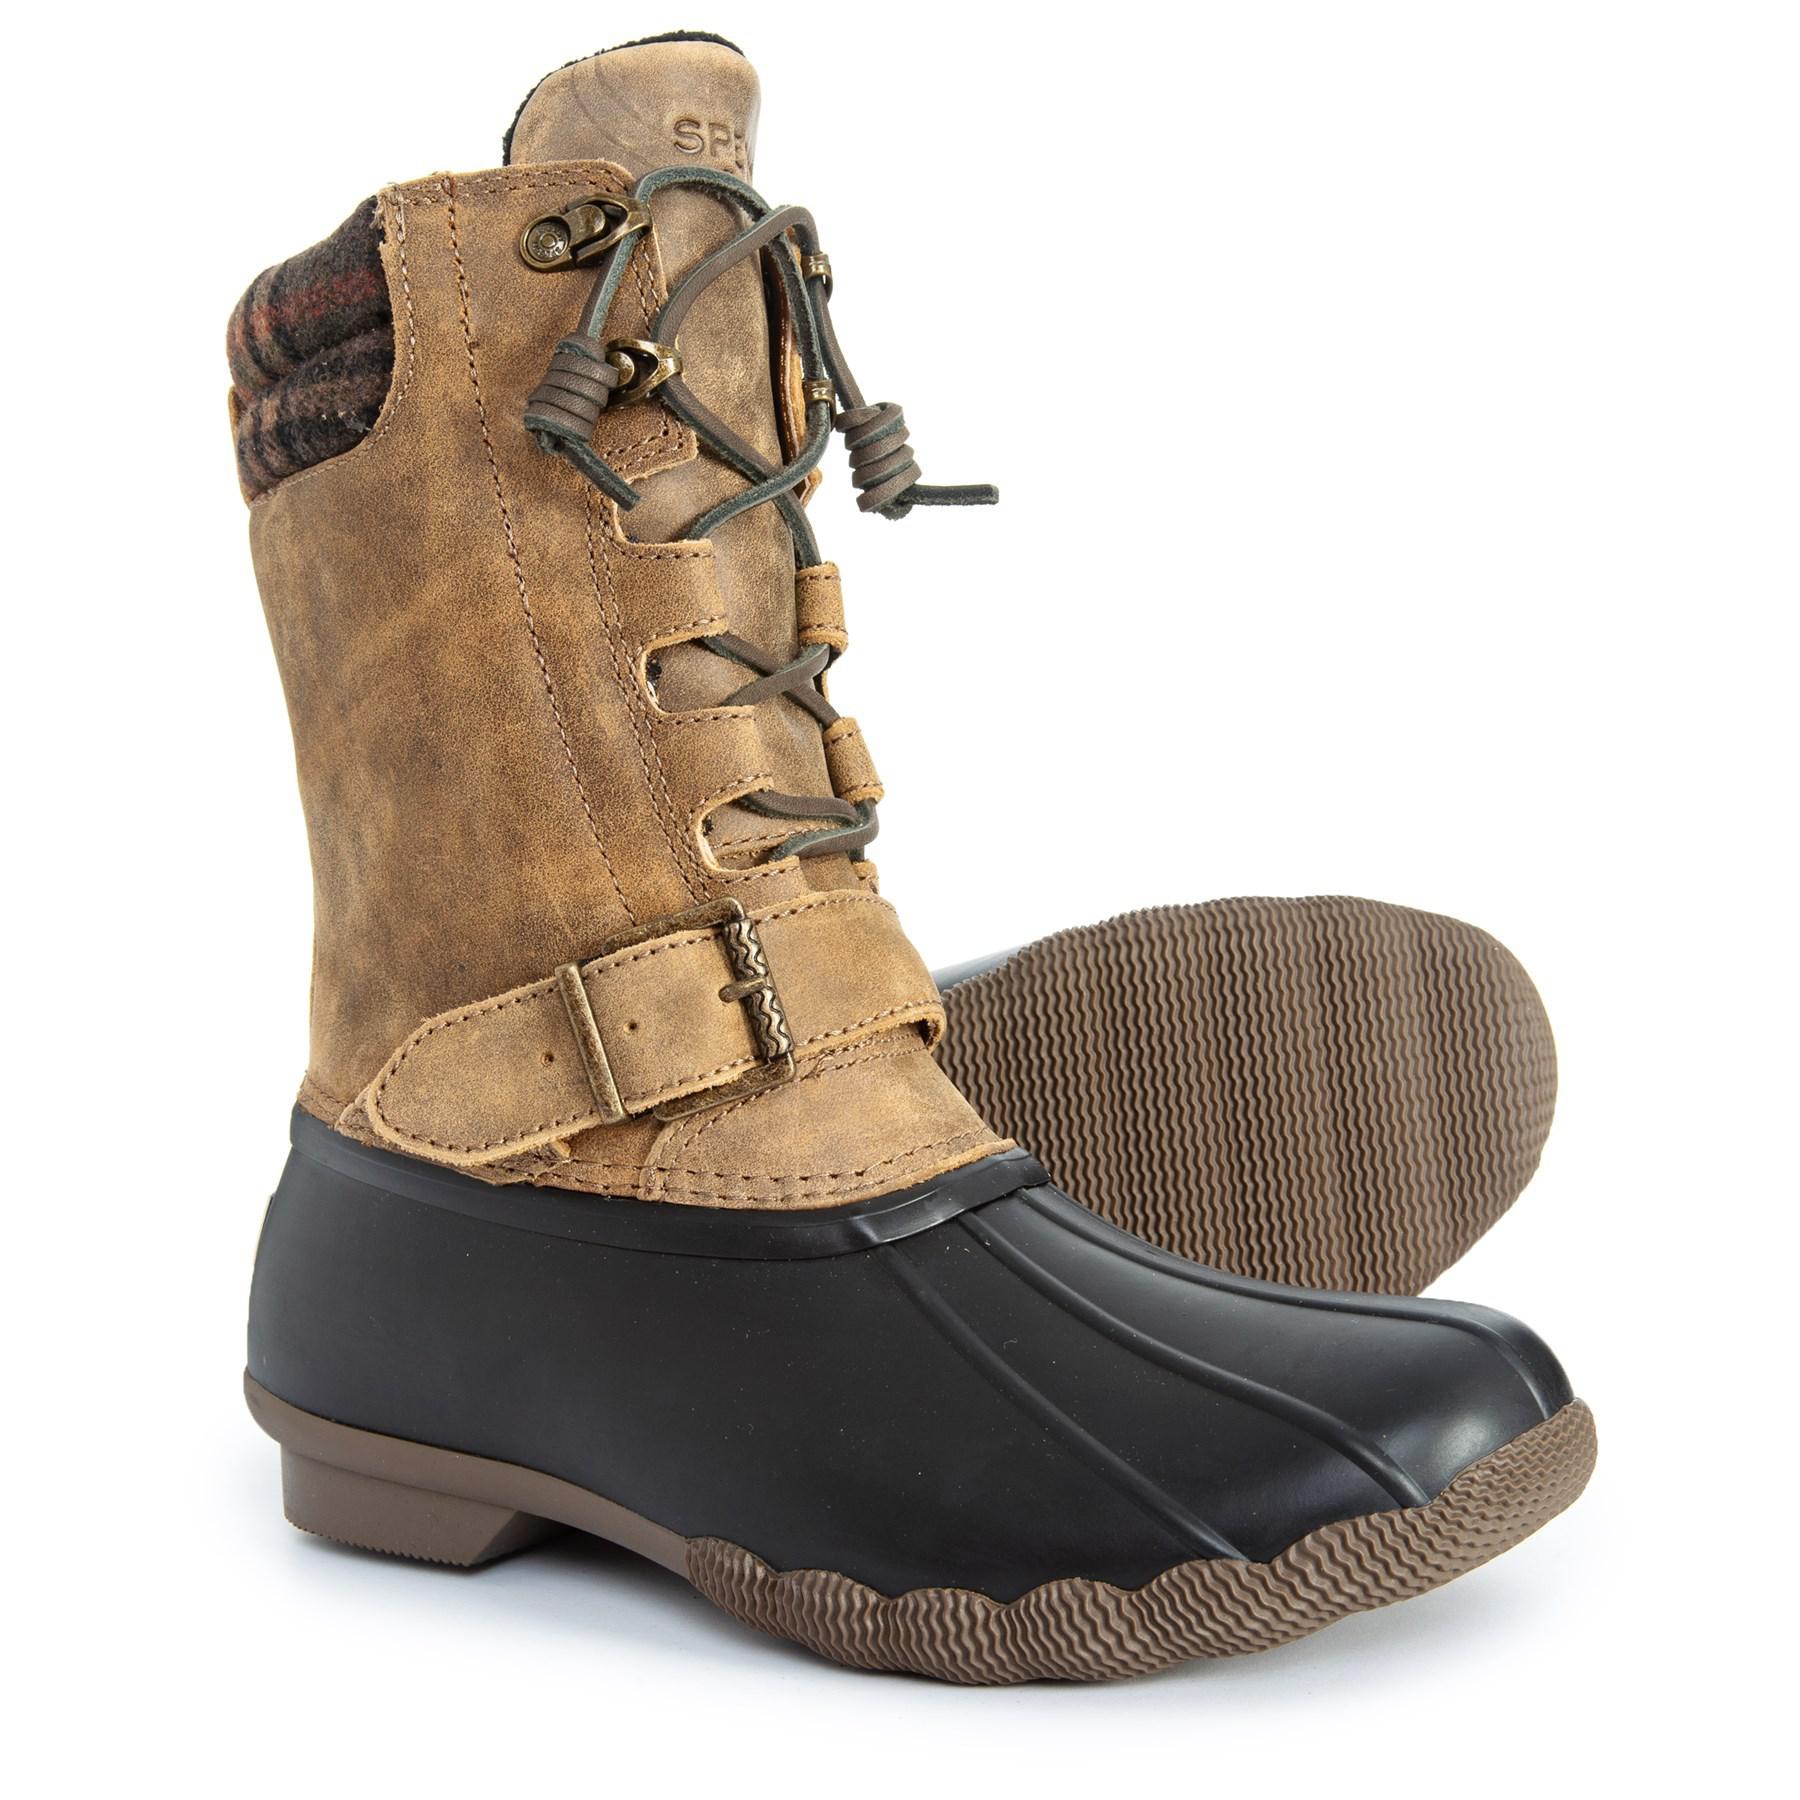 Lyst - Sperry Top-Sider Saltwater Misty Winter Boots in Black